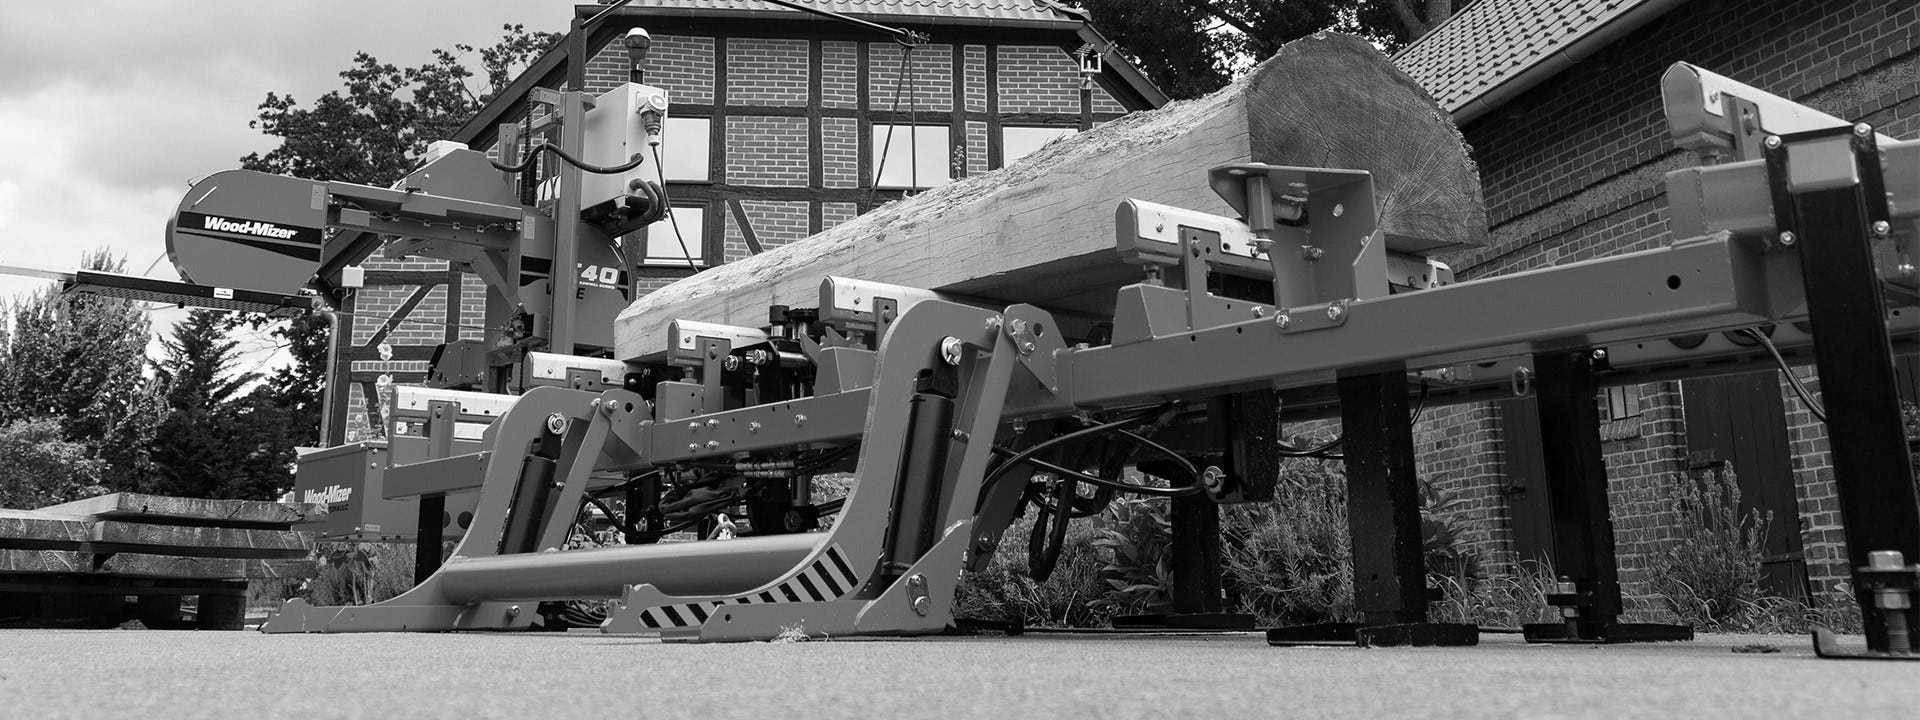 The LT40 Sawmill History: Bed and Hydraulics Upgrades   